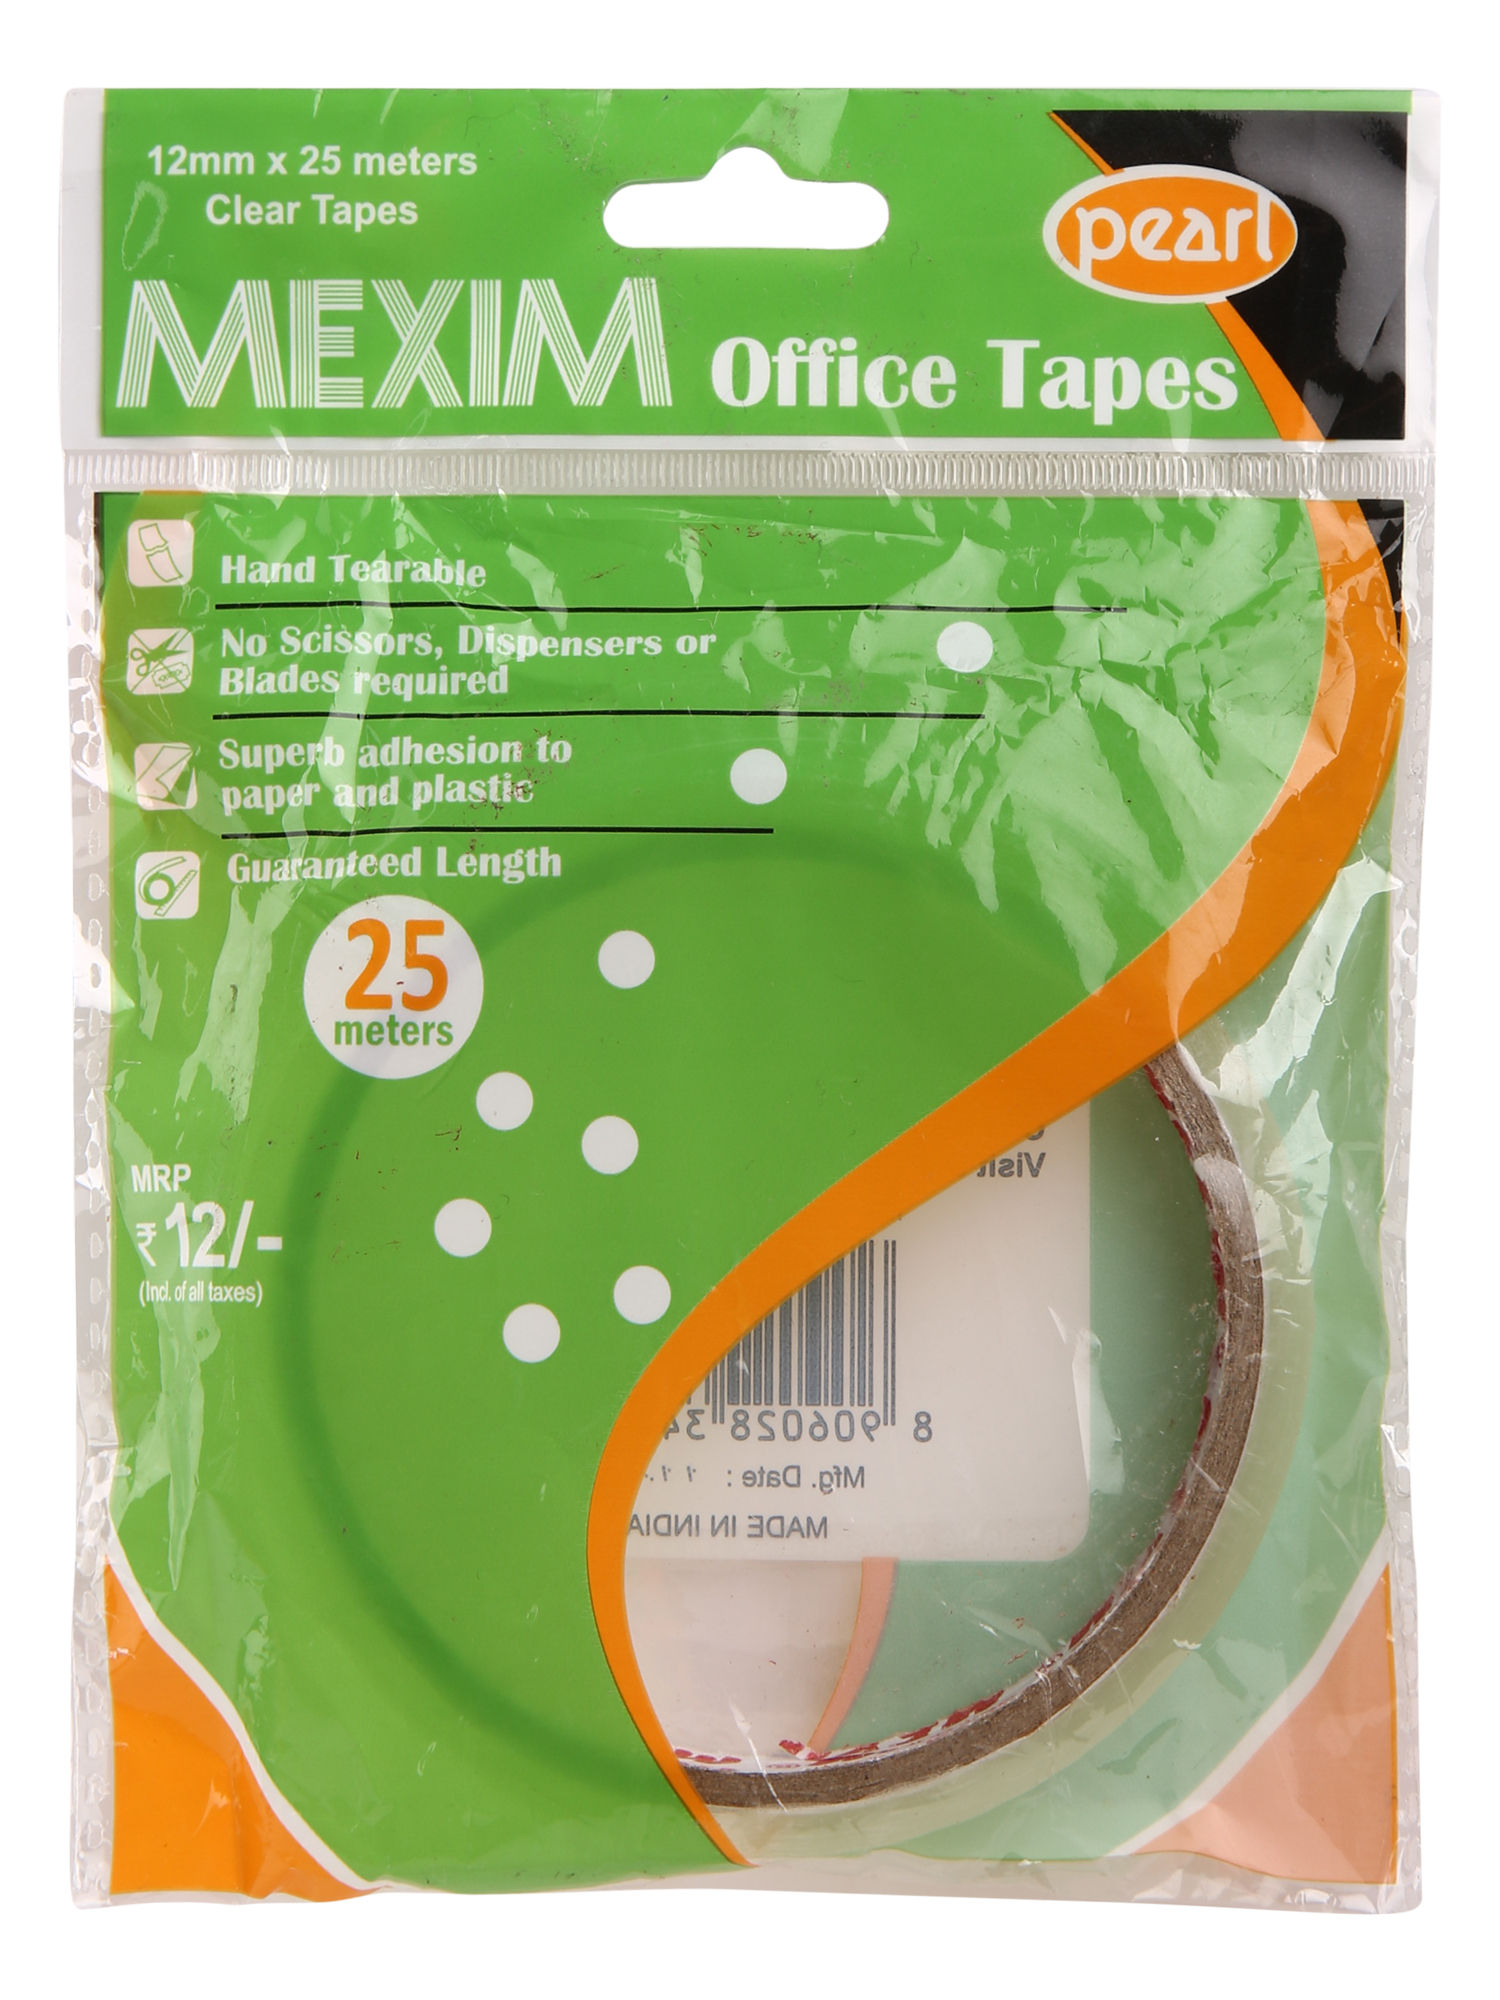 Easy Tear Tapes